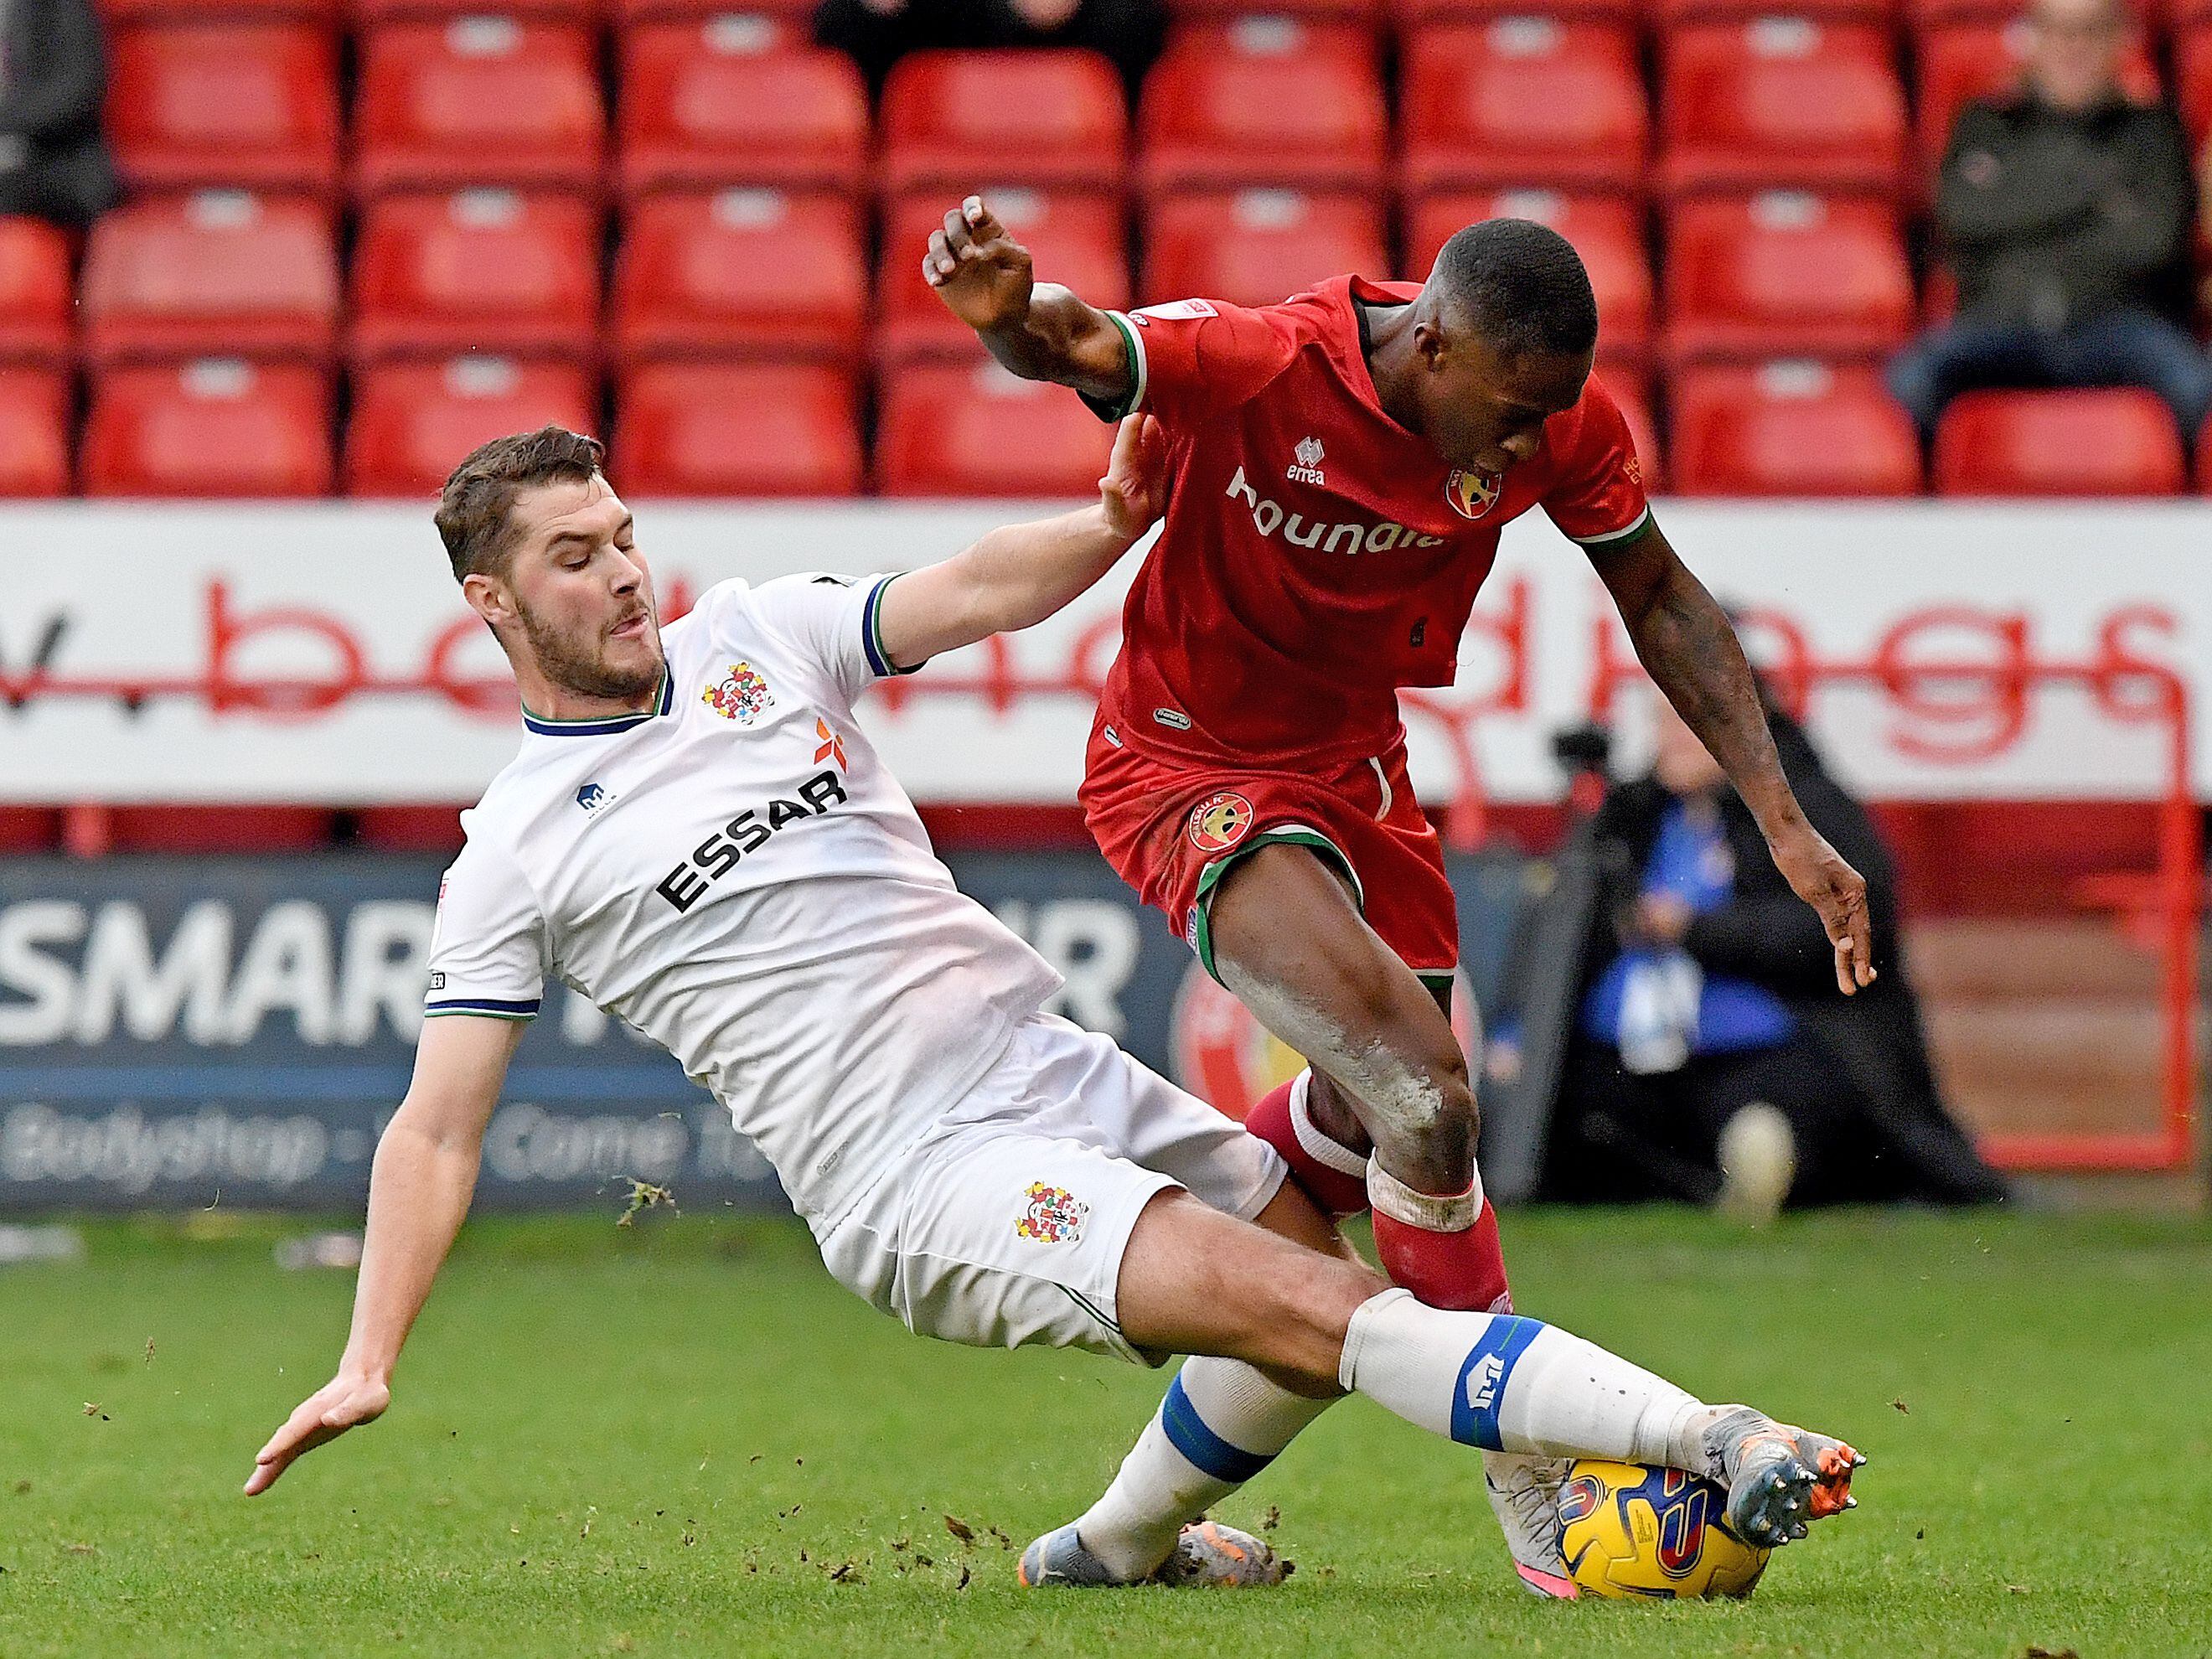 Walsall defender pleased with 'big growth' amid on and off field challenges